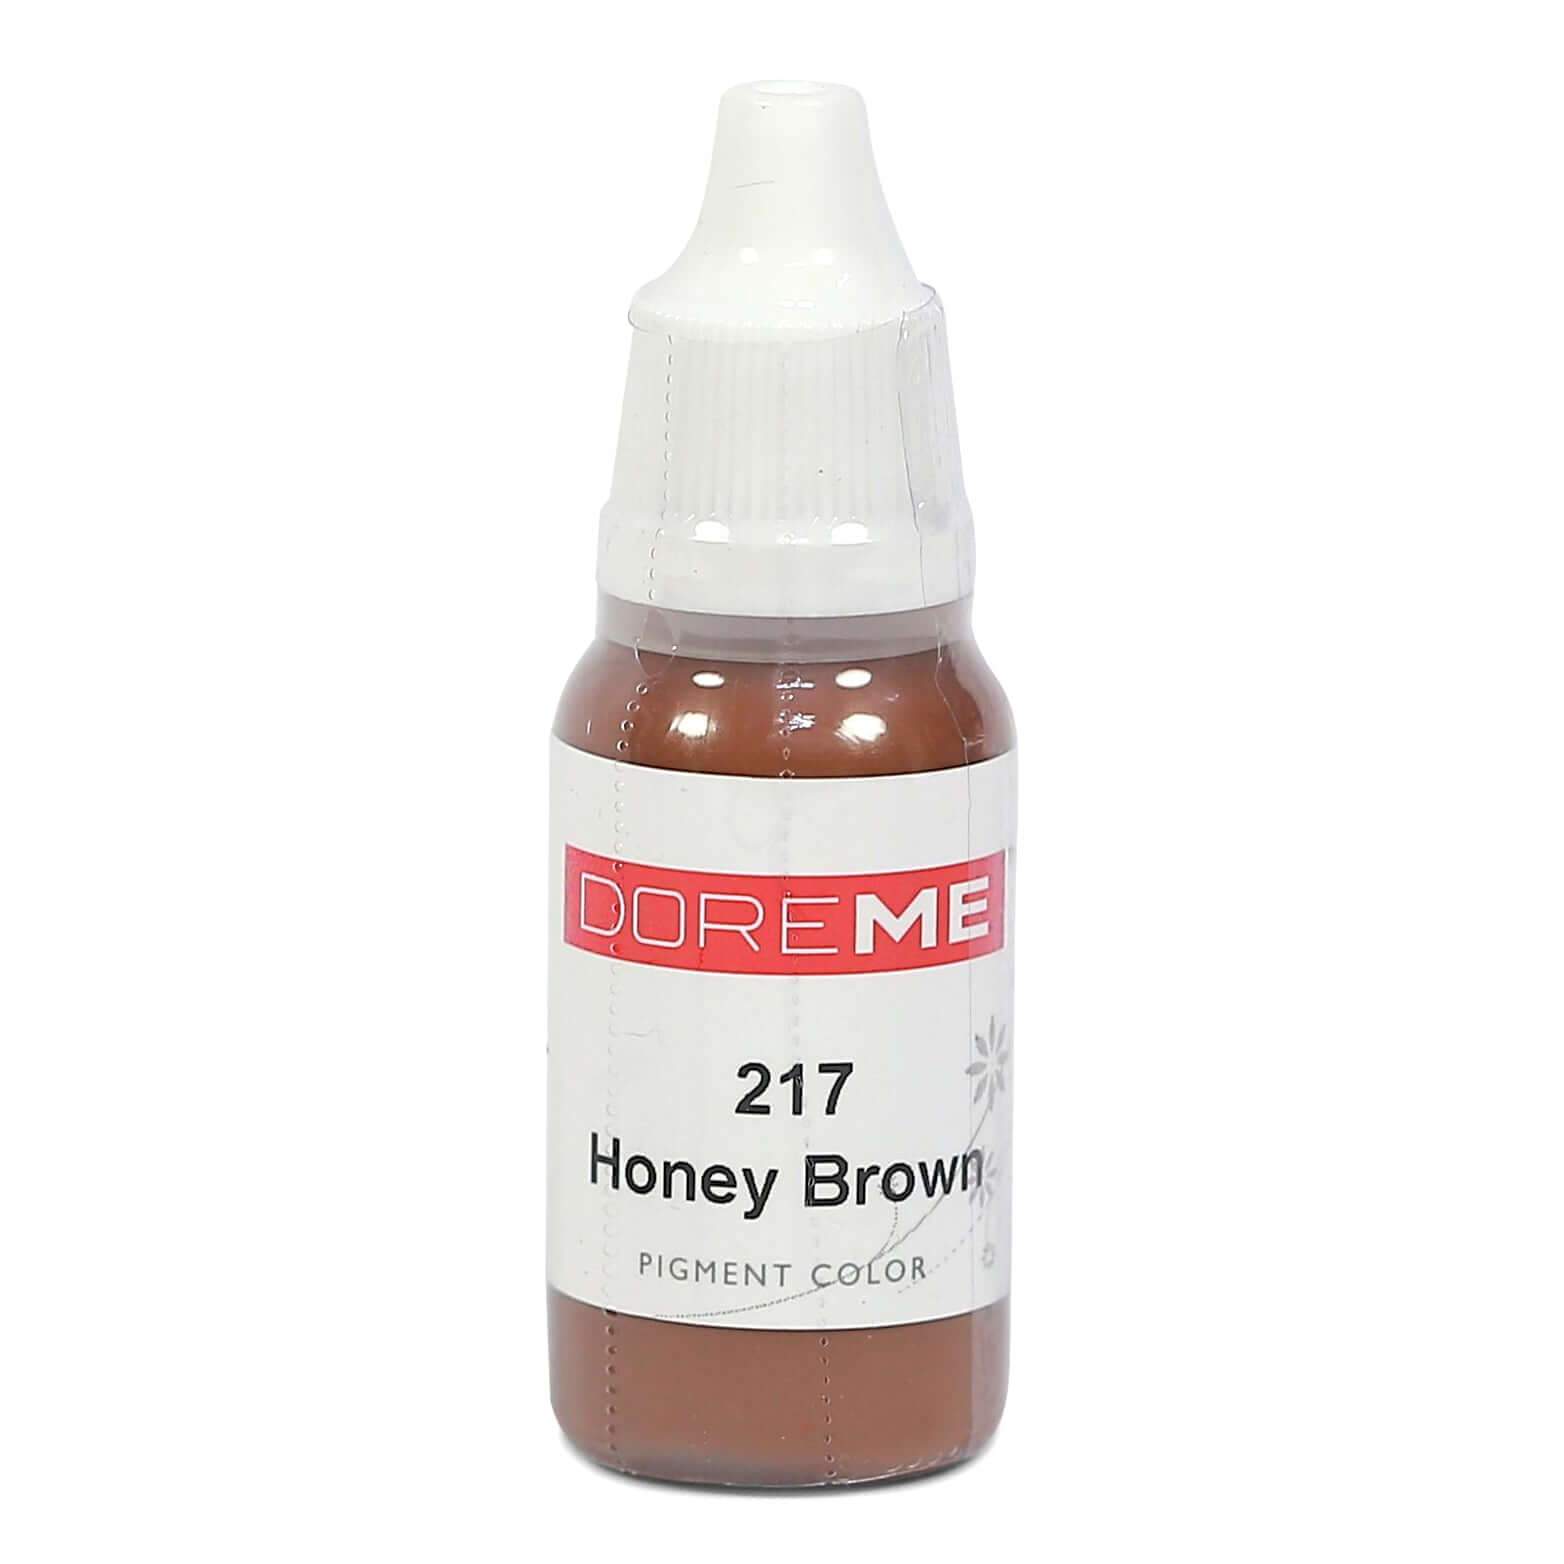 Permanent Makeup pigments Doreme Micropigmentation Eyebrow, Eyeliner, Lip Colours 217 Honey Brown (n) - Beautiful Ink UK trade and wholesale supplier